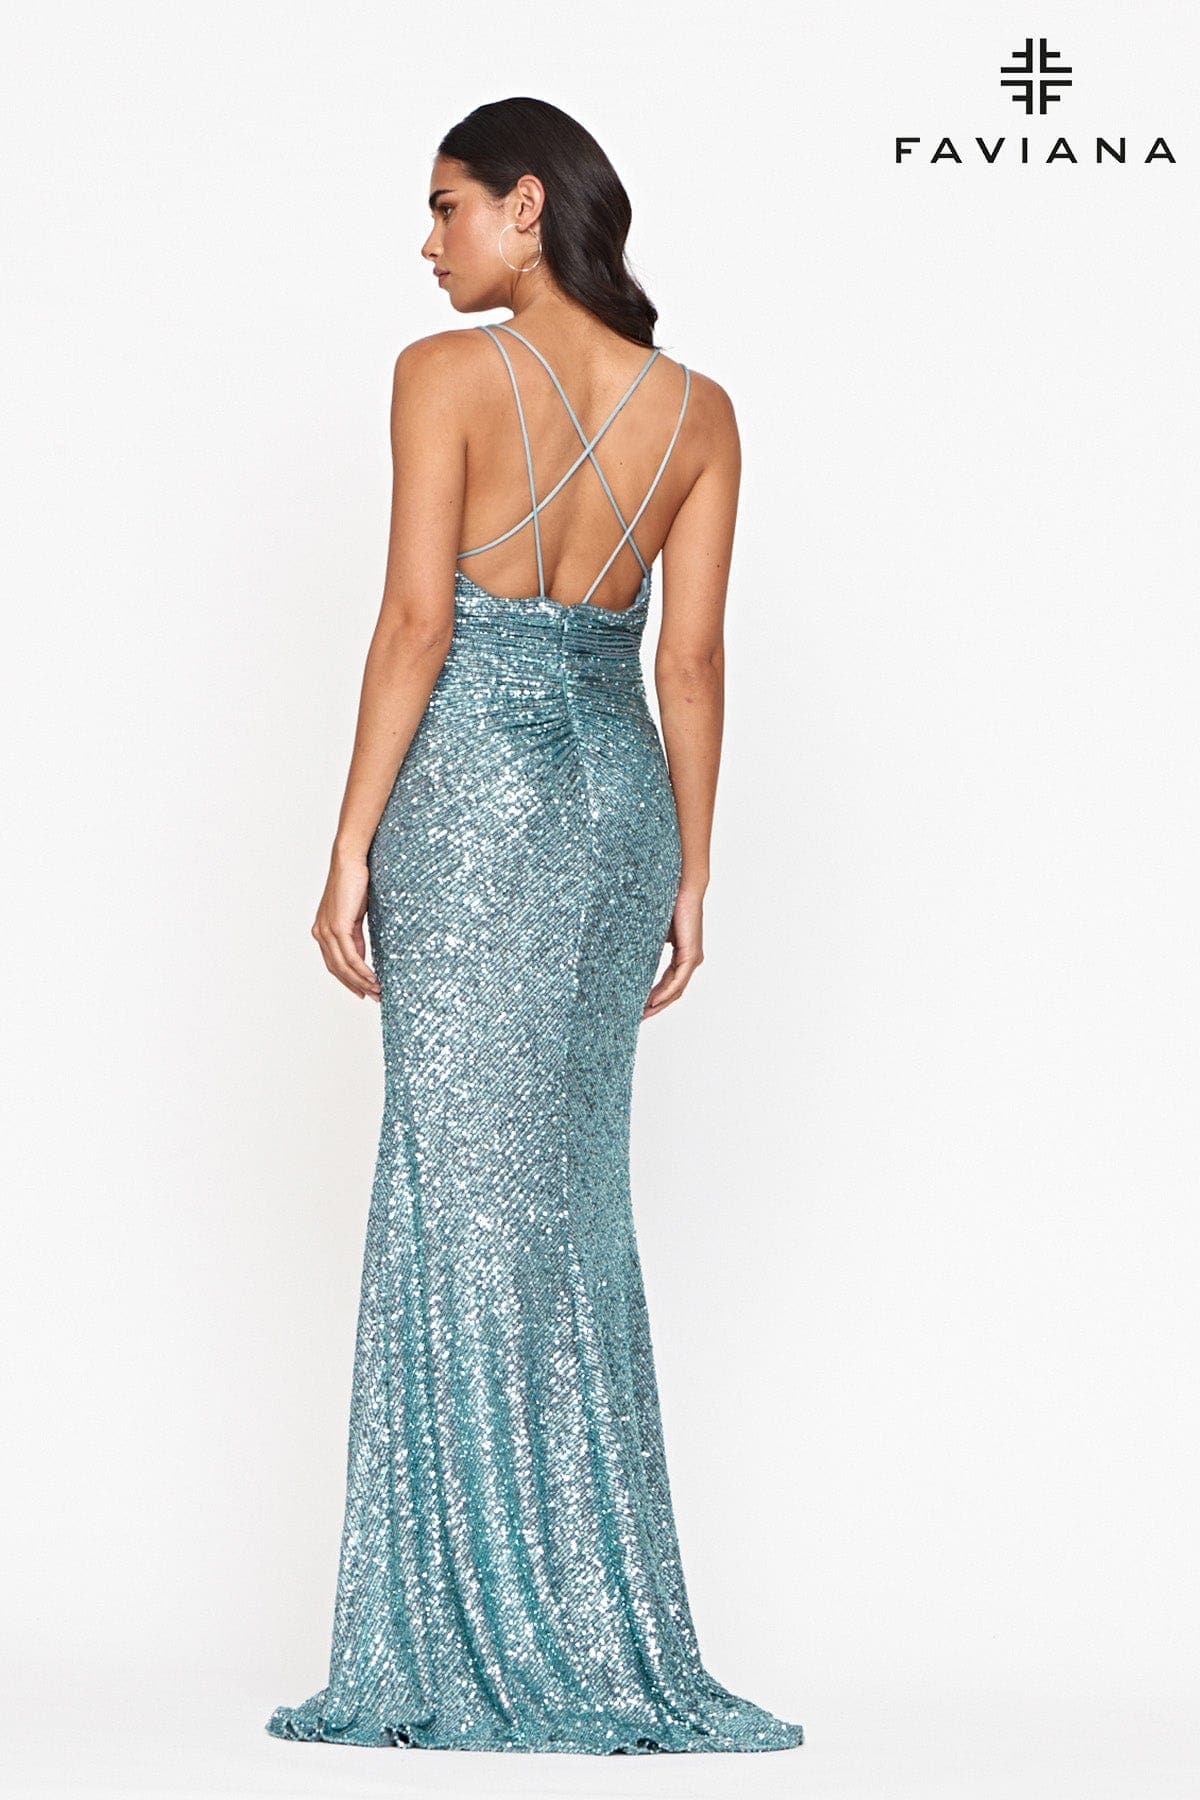 Sequin Prom Dress With V Neck And Lace Up Back